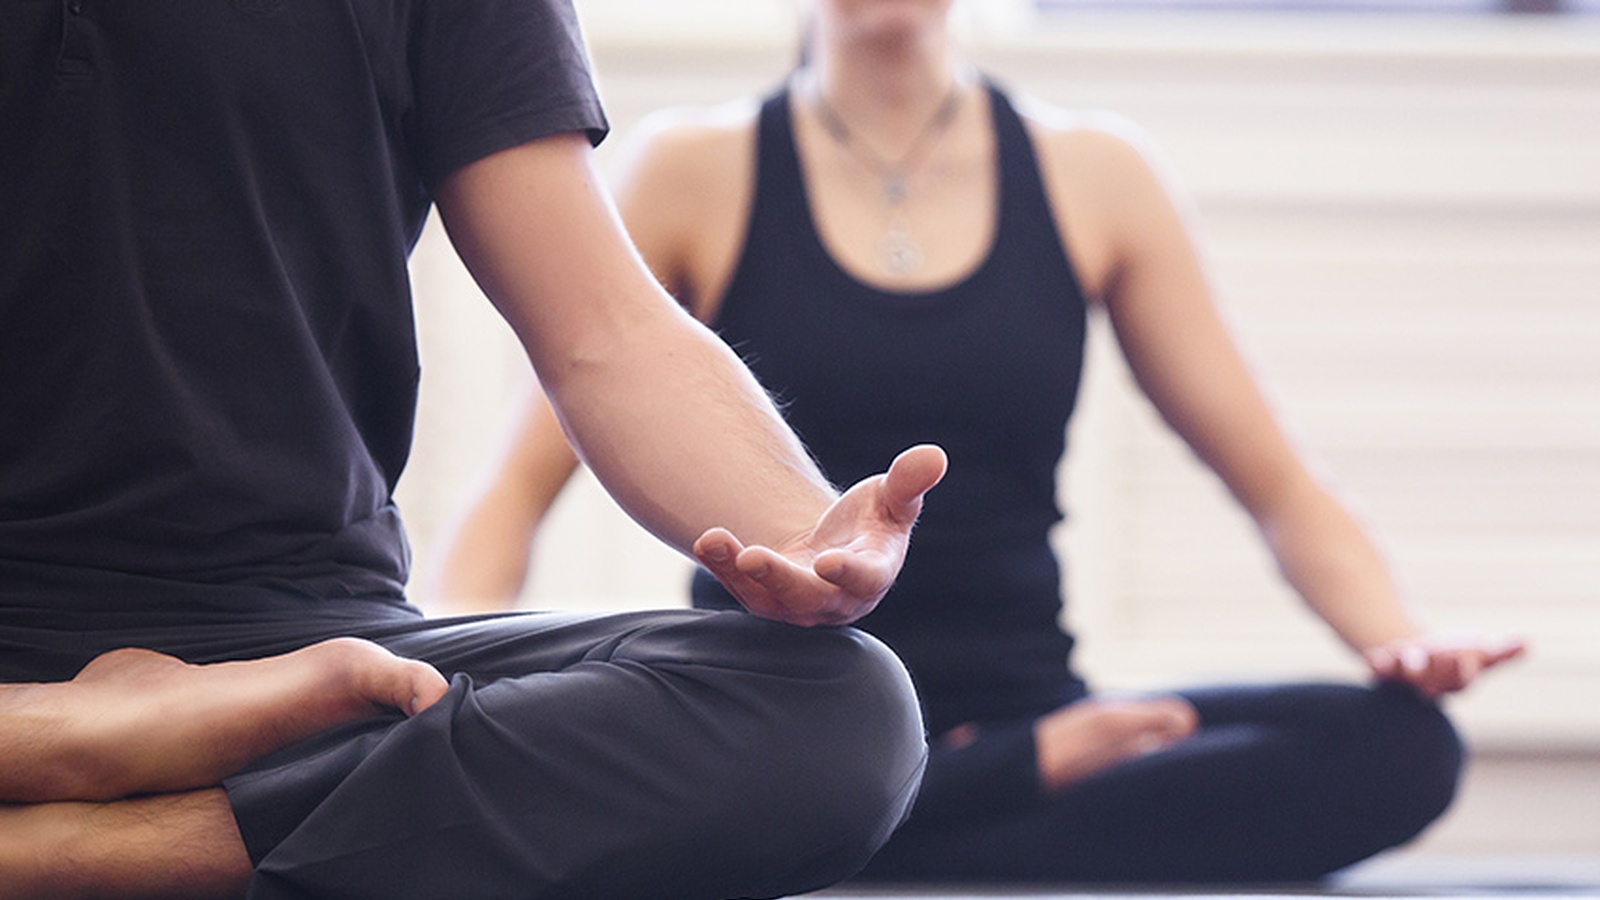 Here’s What Happens to Your Body When You Meditate